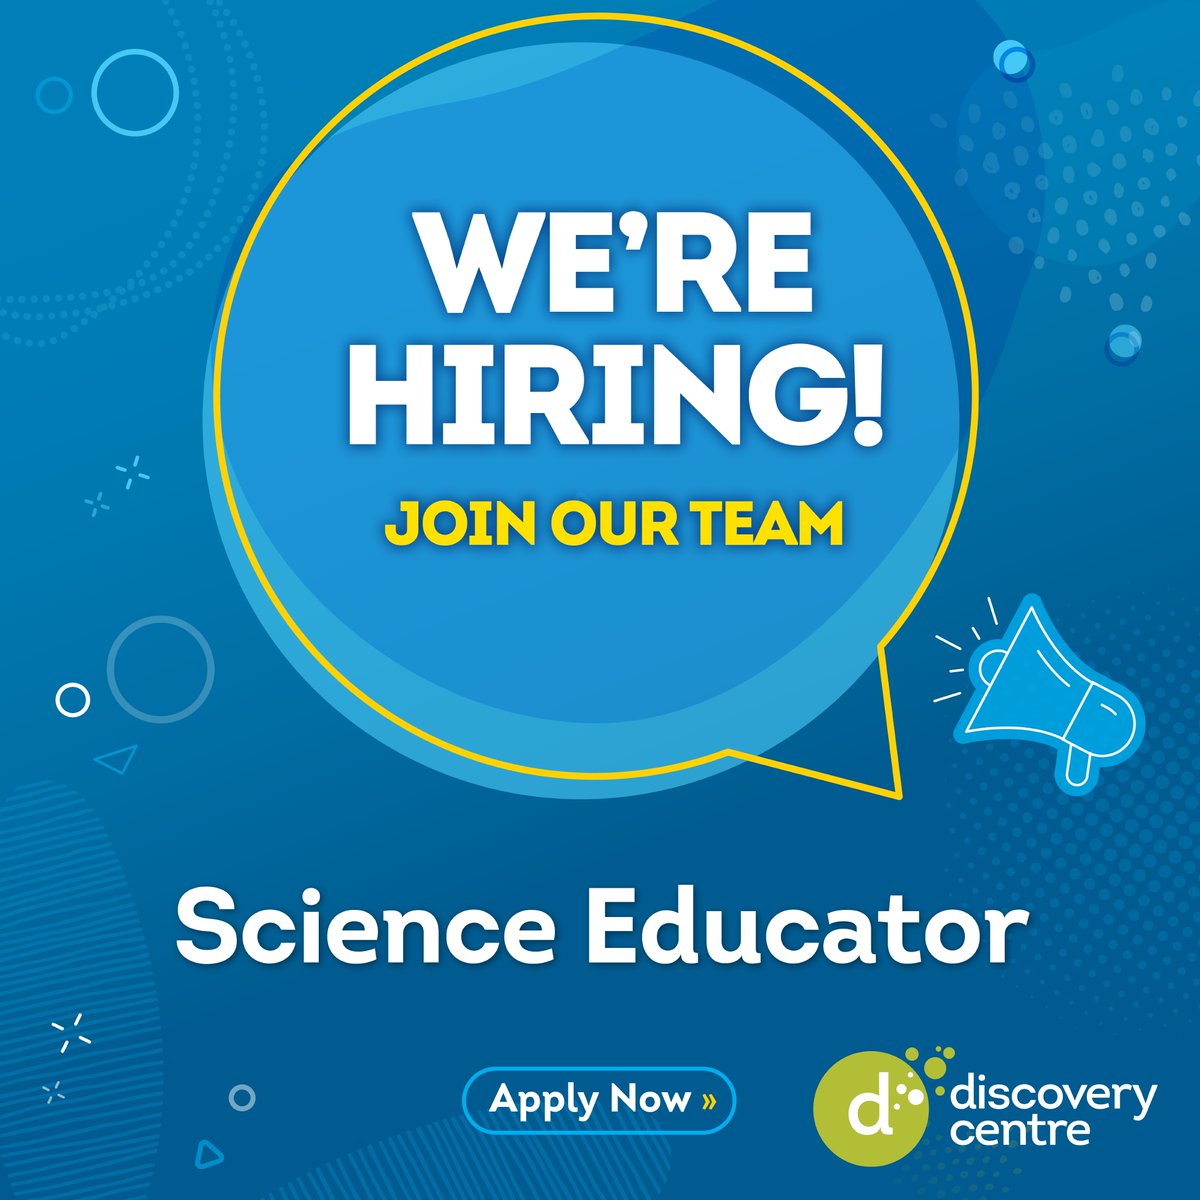 Are you interested in developing and delivering creative STEAM programming for learners of all ages? We are accepting applications for the role: Science Educator! Apply now: thediscoverycentre.ca/science-educat…